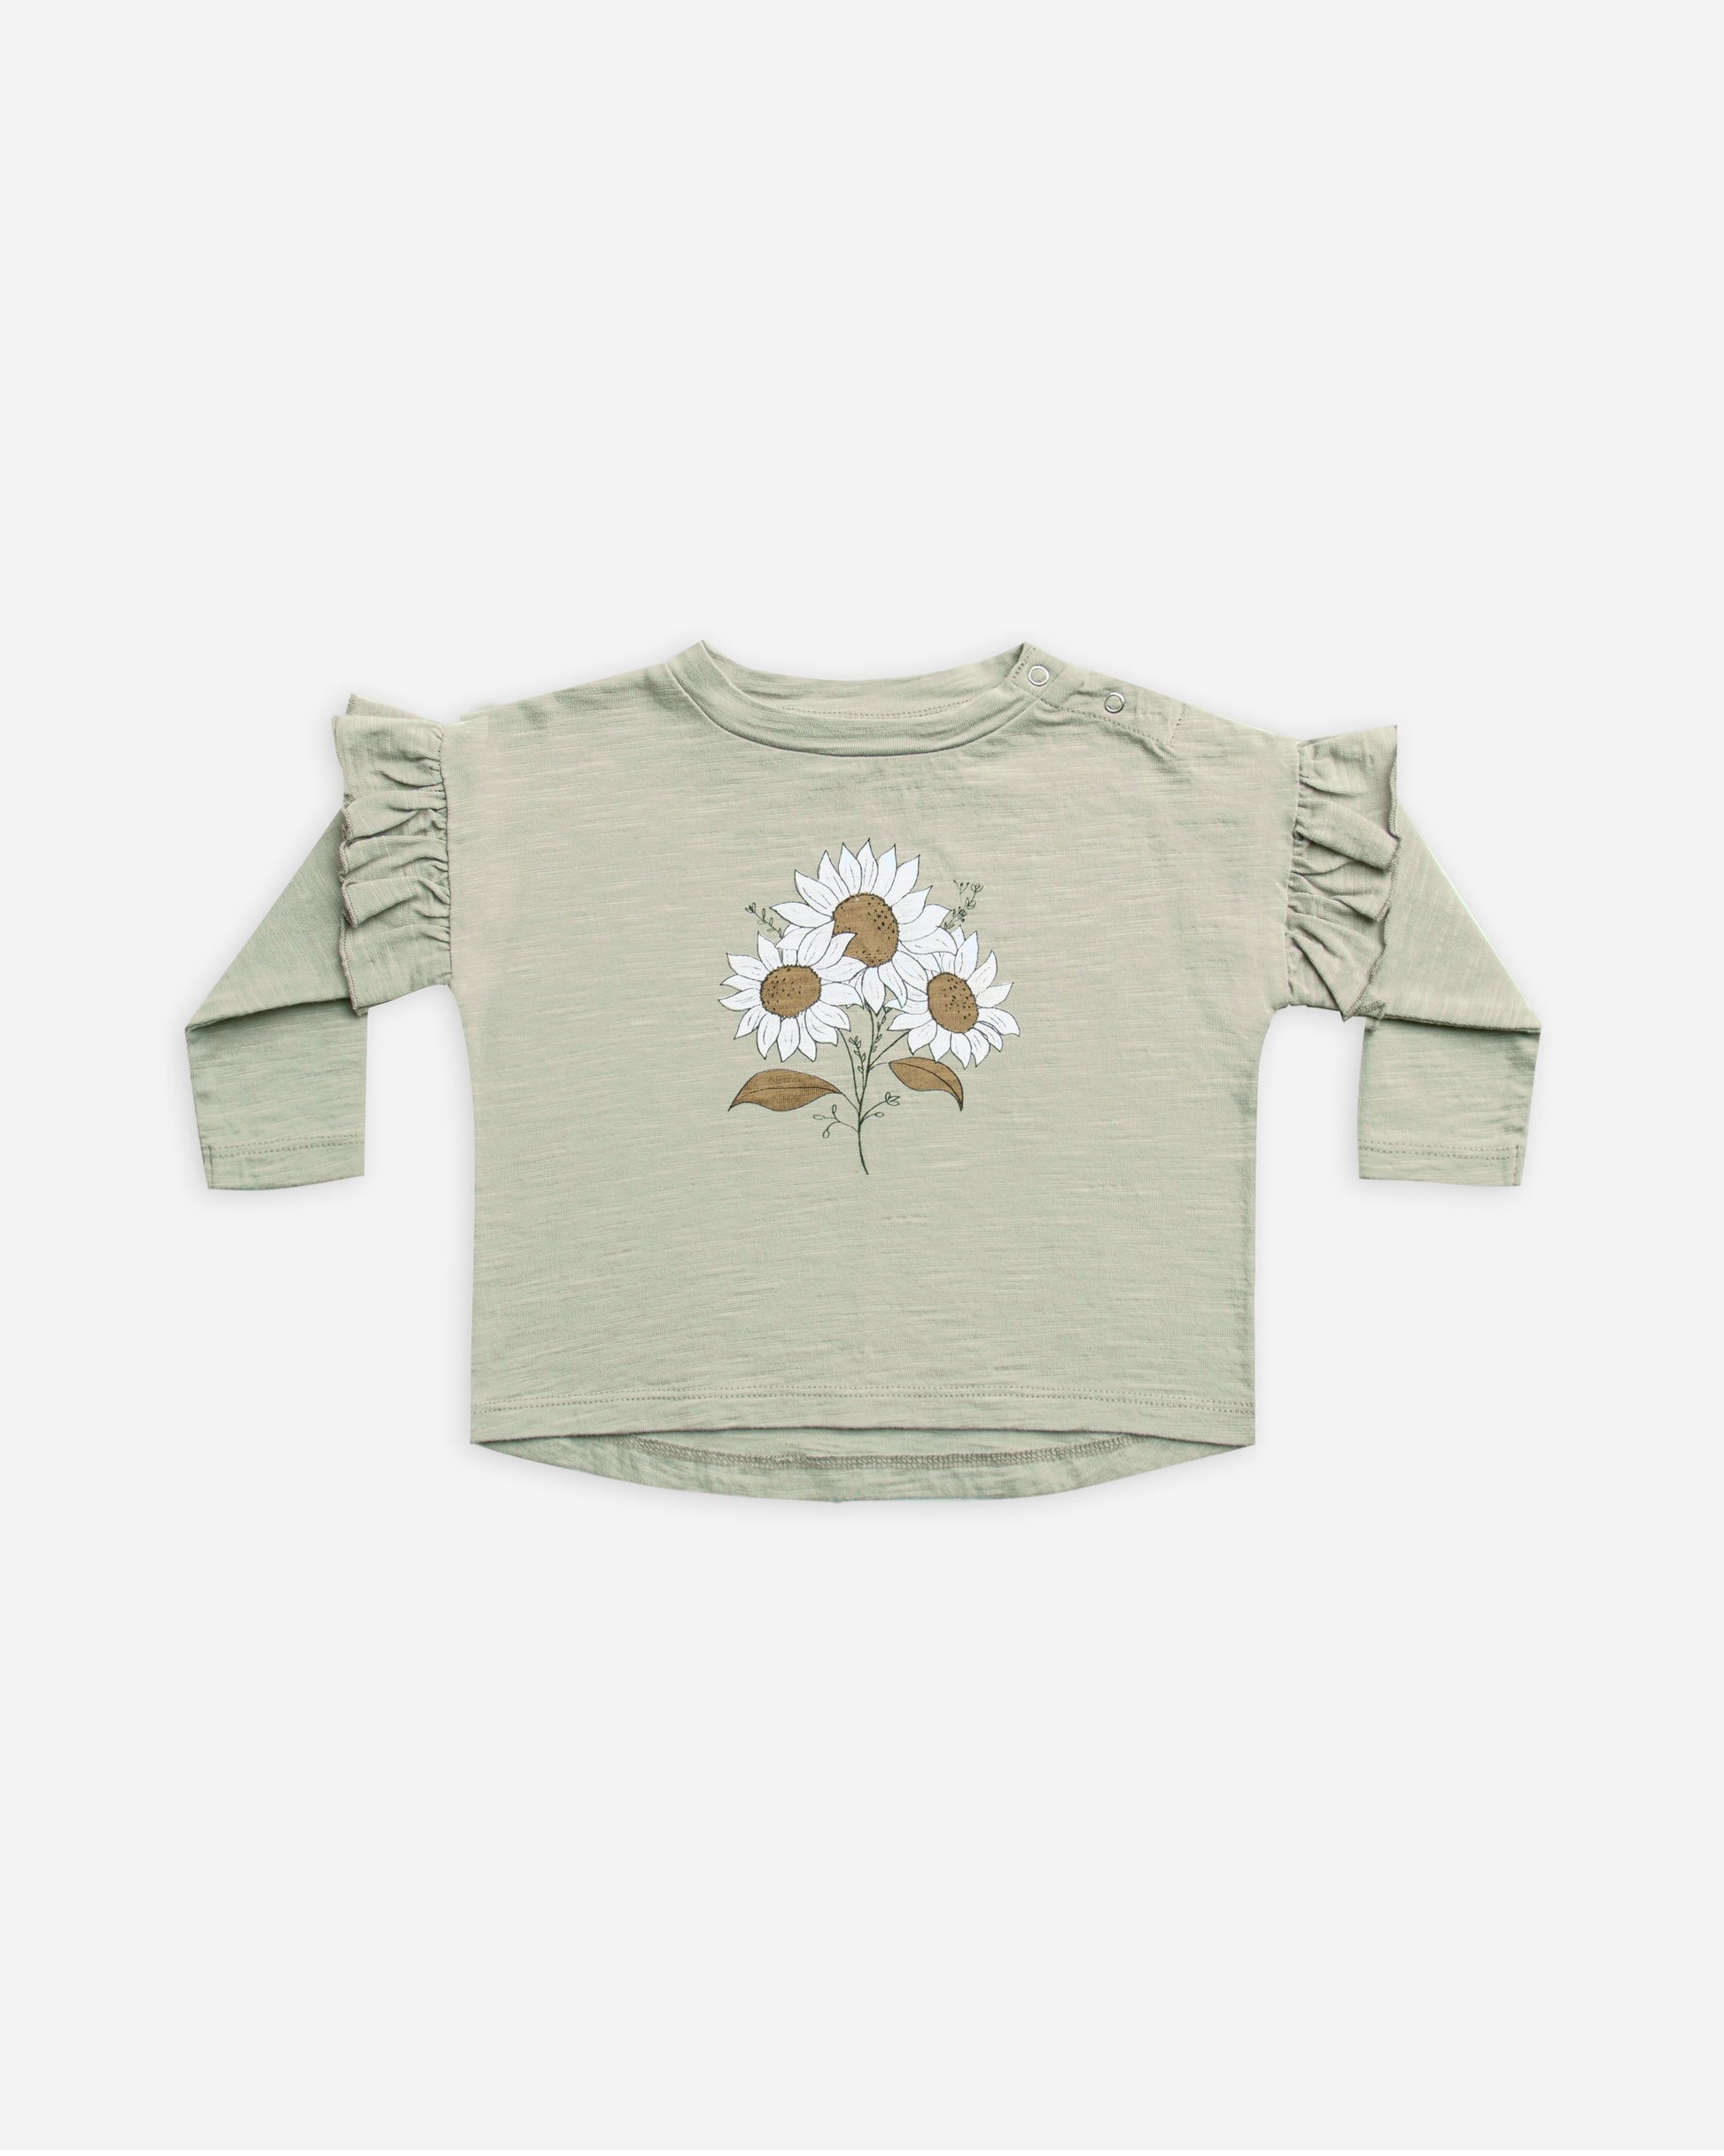 Ruffle Long Sleeve Tee in Bouquet  - Doodlebug's Children's Boutique